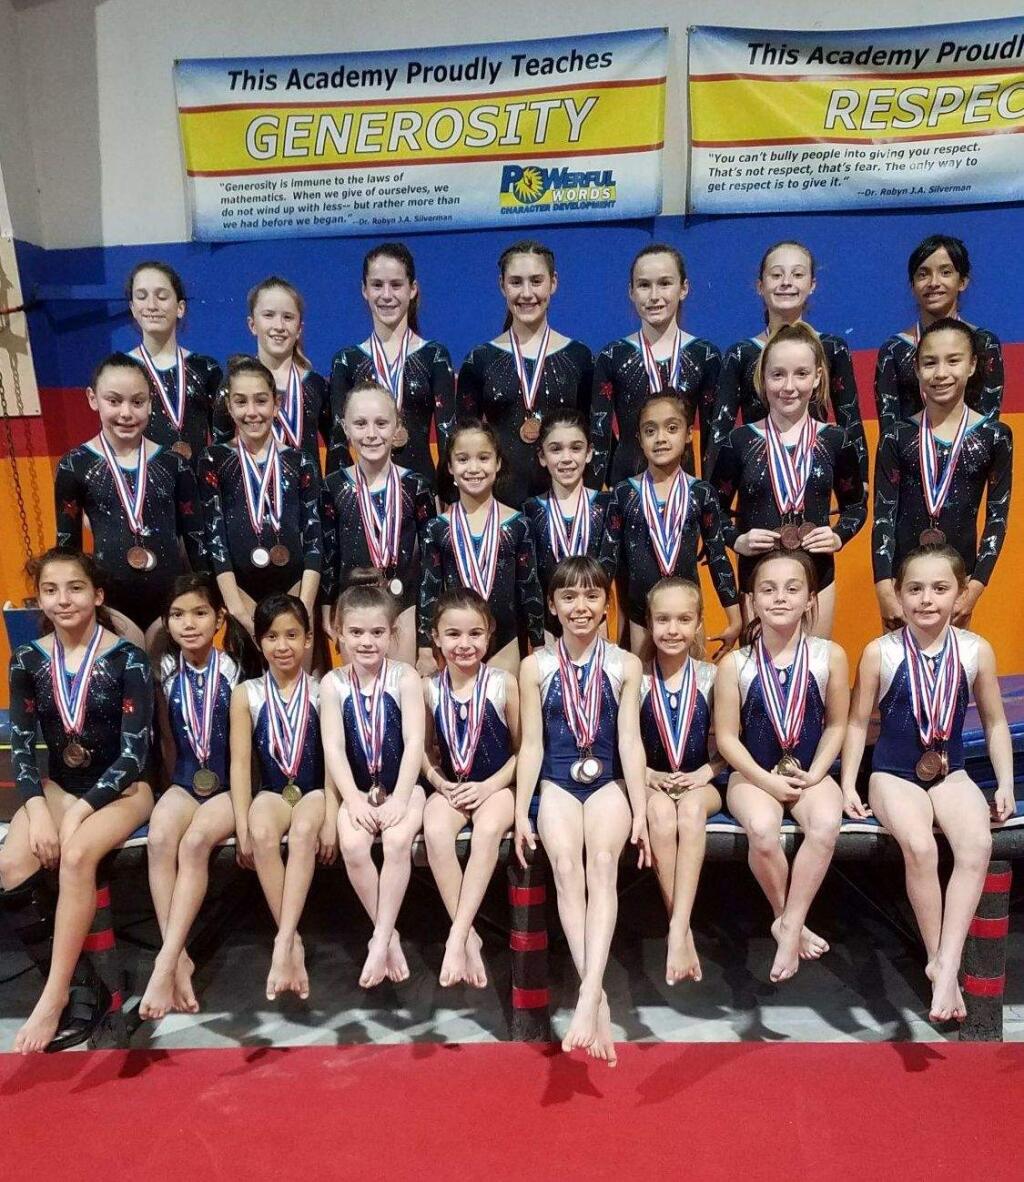 JOHN JACKSON/ARGUS-COURIER STAFFRedwood Empire gymnasts had a reason to smile after their showing in the Norcal State Championships.